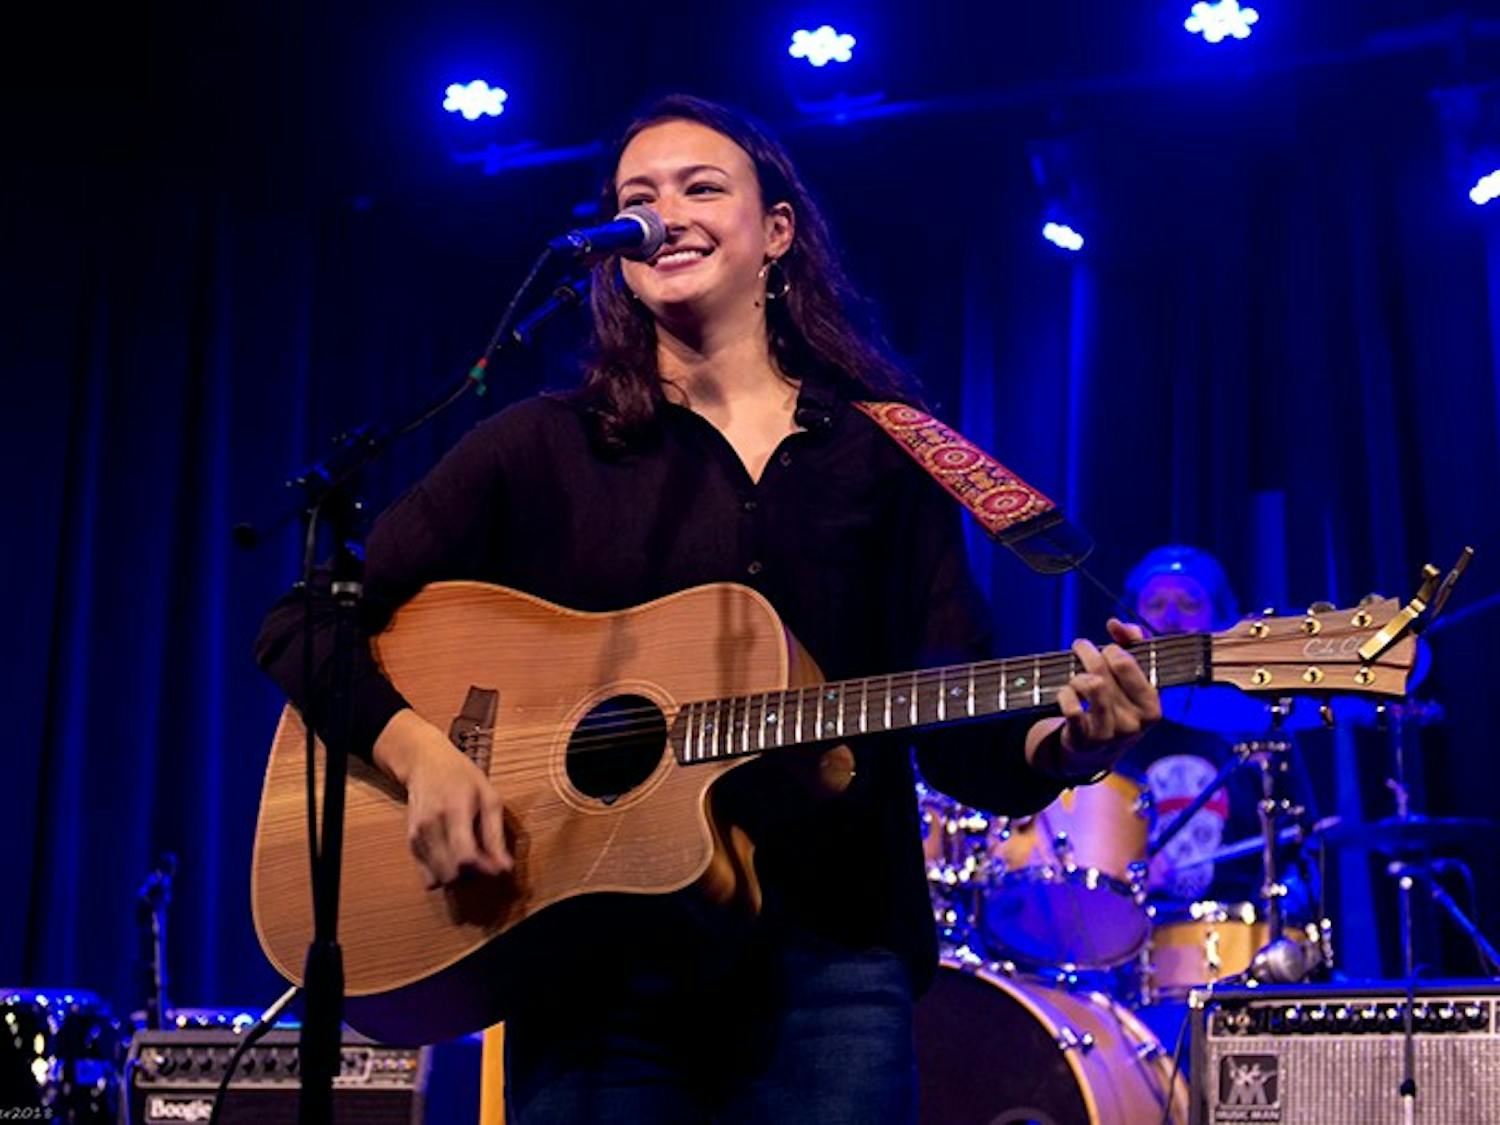 Mia Green performed in July 2018 at Isis Music Hall in Asheville, North Carolina. The songs she performed were released on her “Paper Days” album.